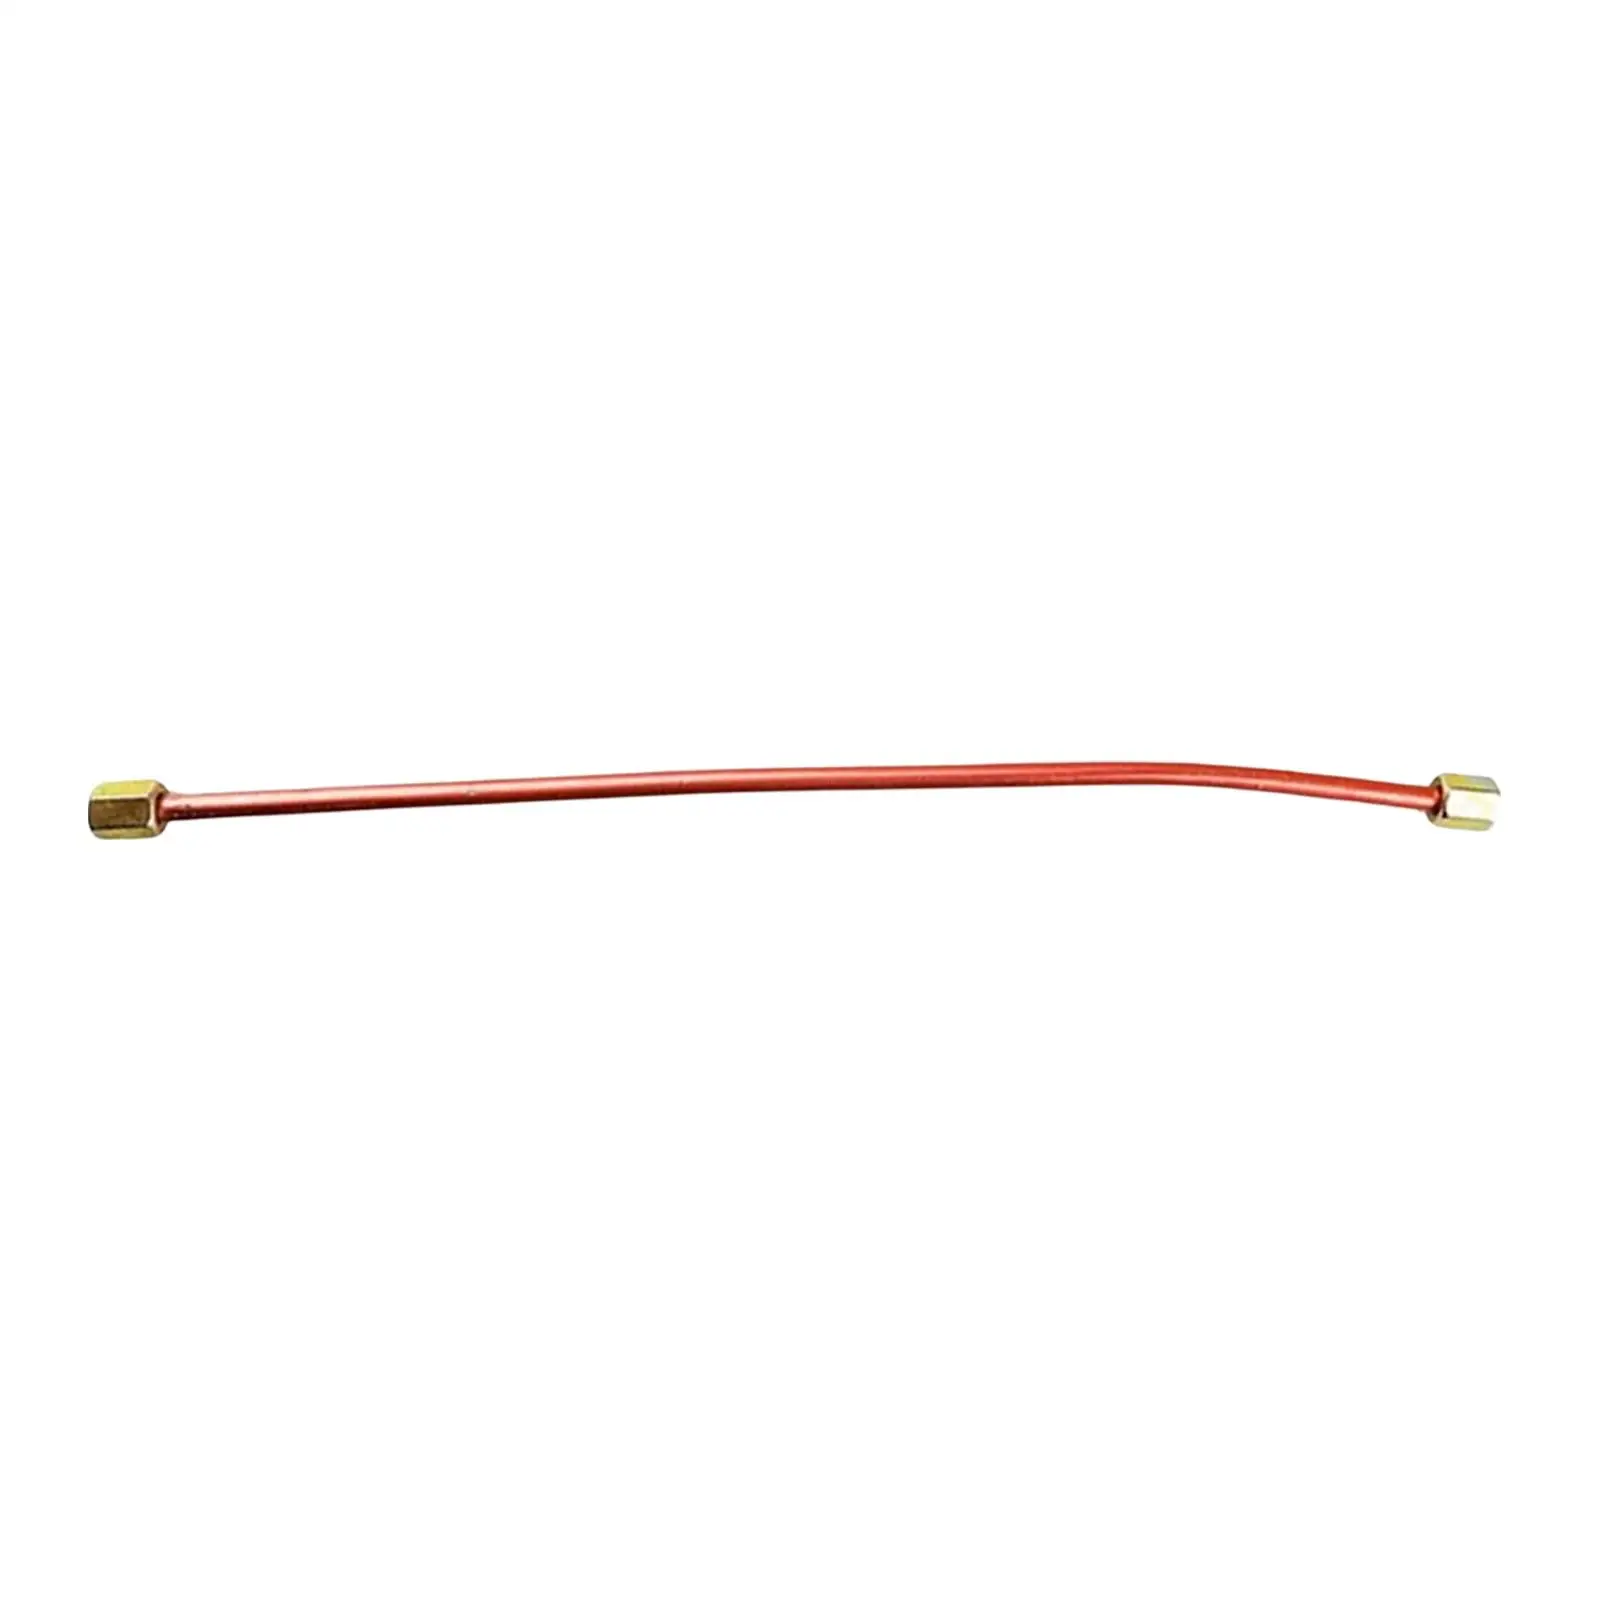 Air Compressor Exhaust Tube for Air Compressor Accessories Replacement